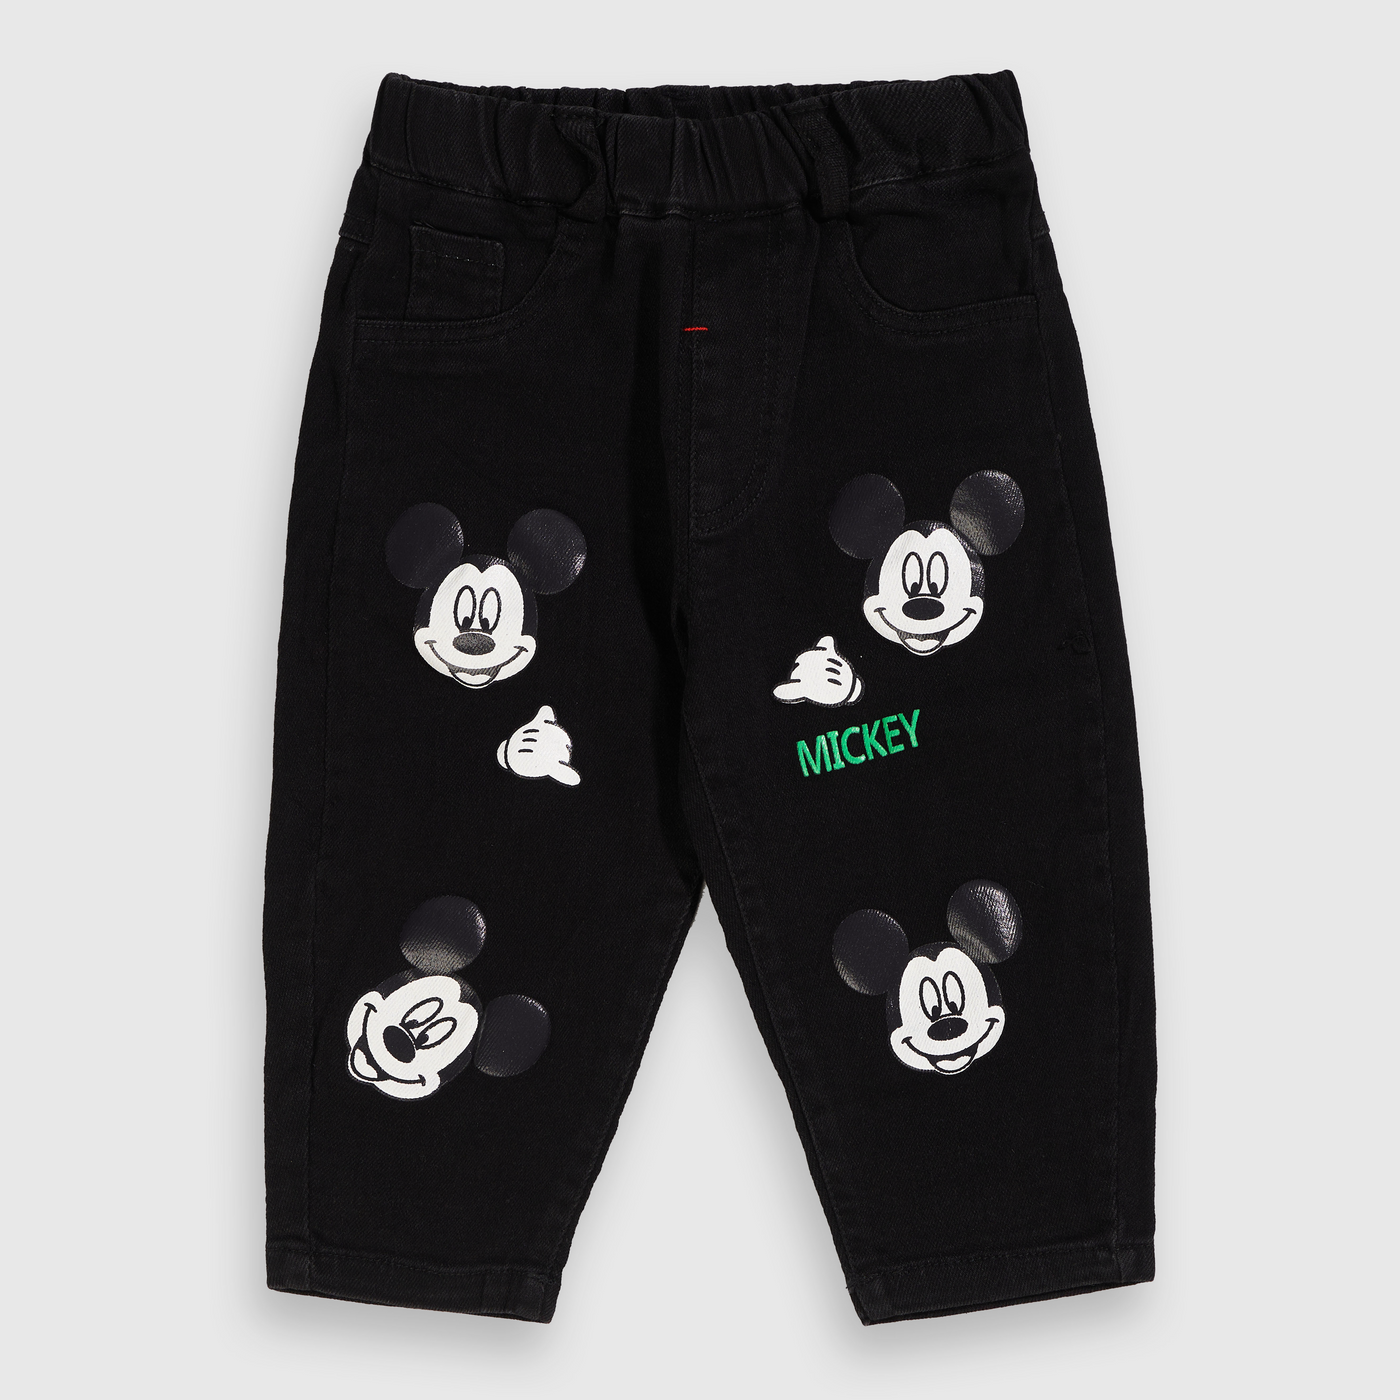 MICKEY PATCHES PANTS